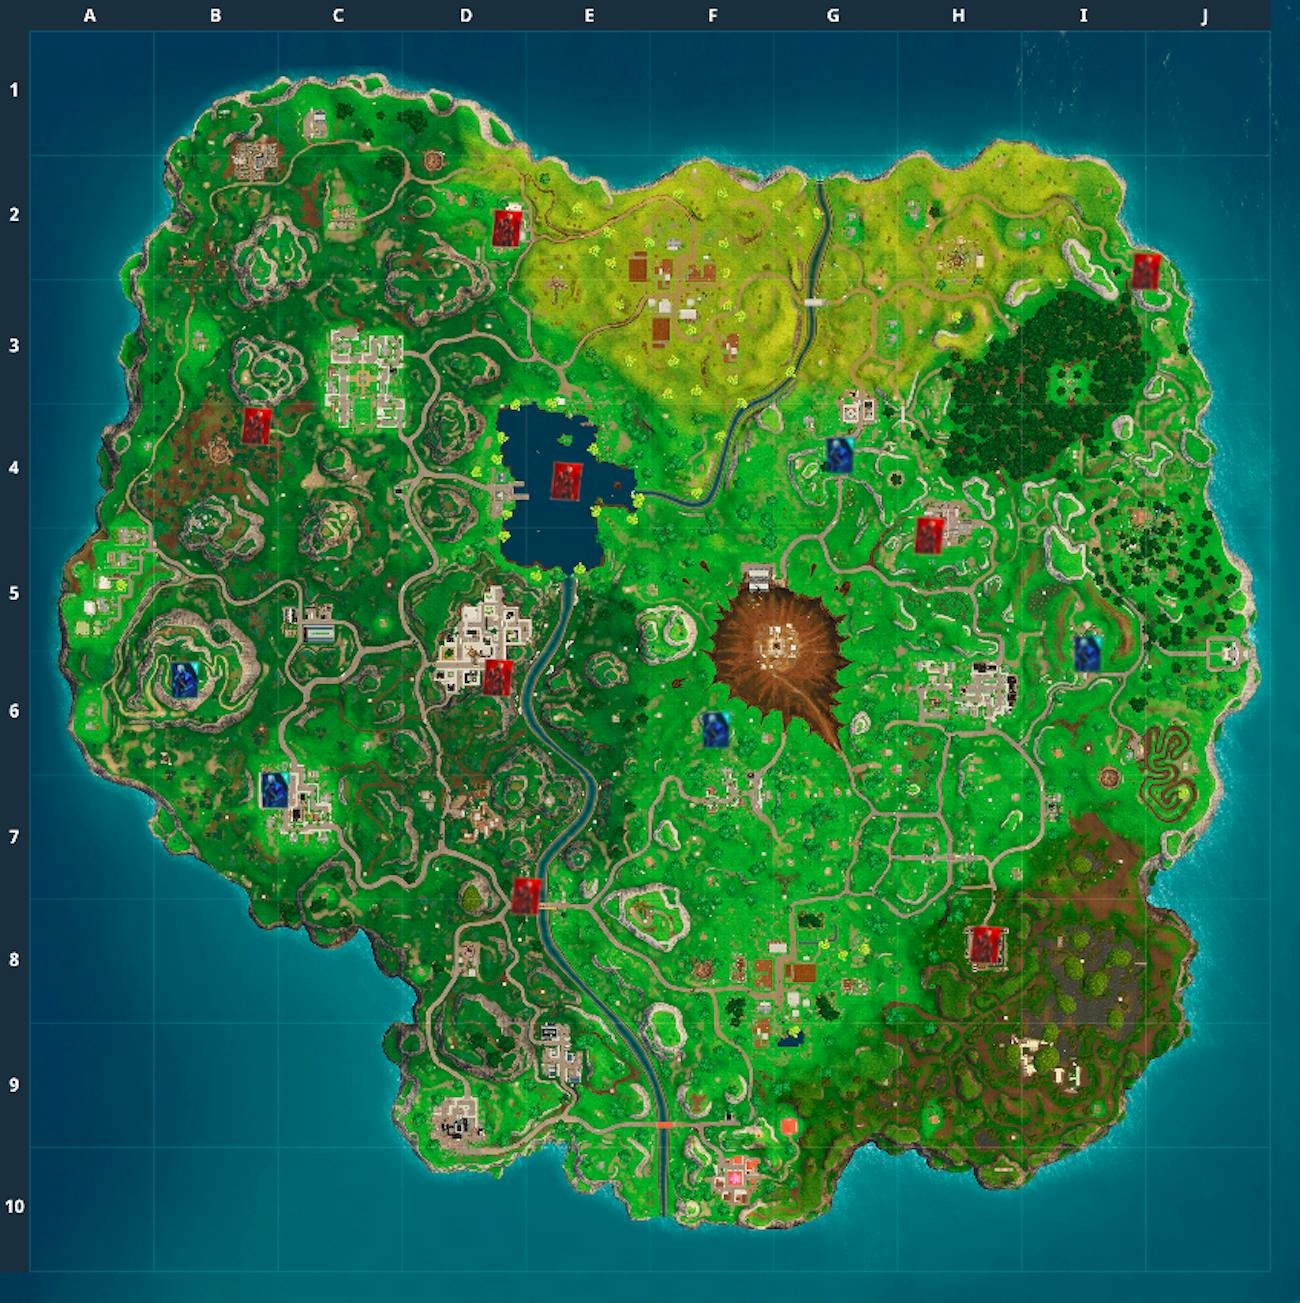 the fortnite week 6 challenge has you spray paint over posters at these locations - fortnite week 6 spray locations